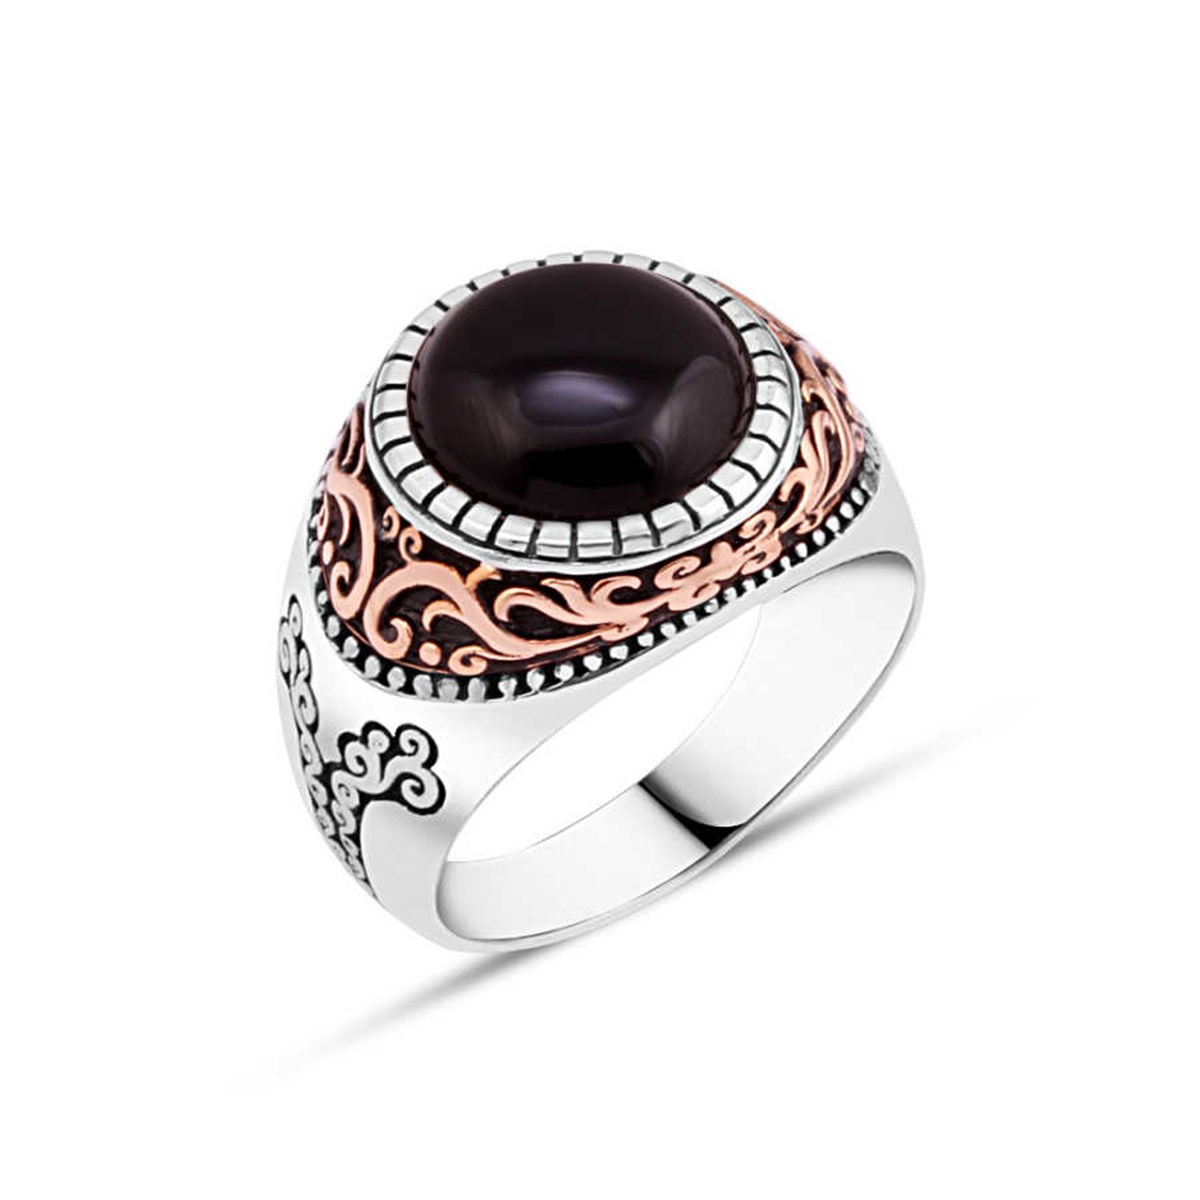 Hooded Agate Stone Silver Men's Ring